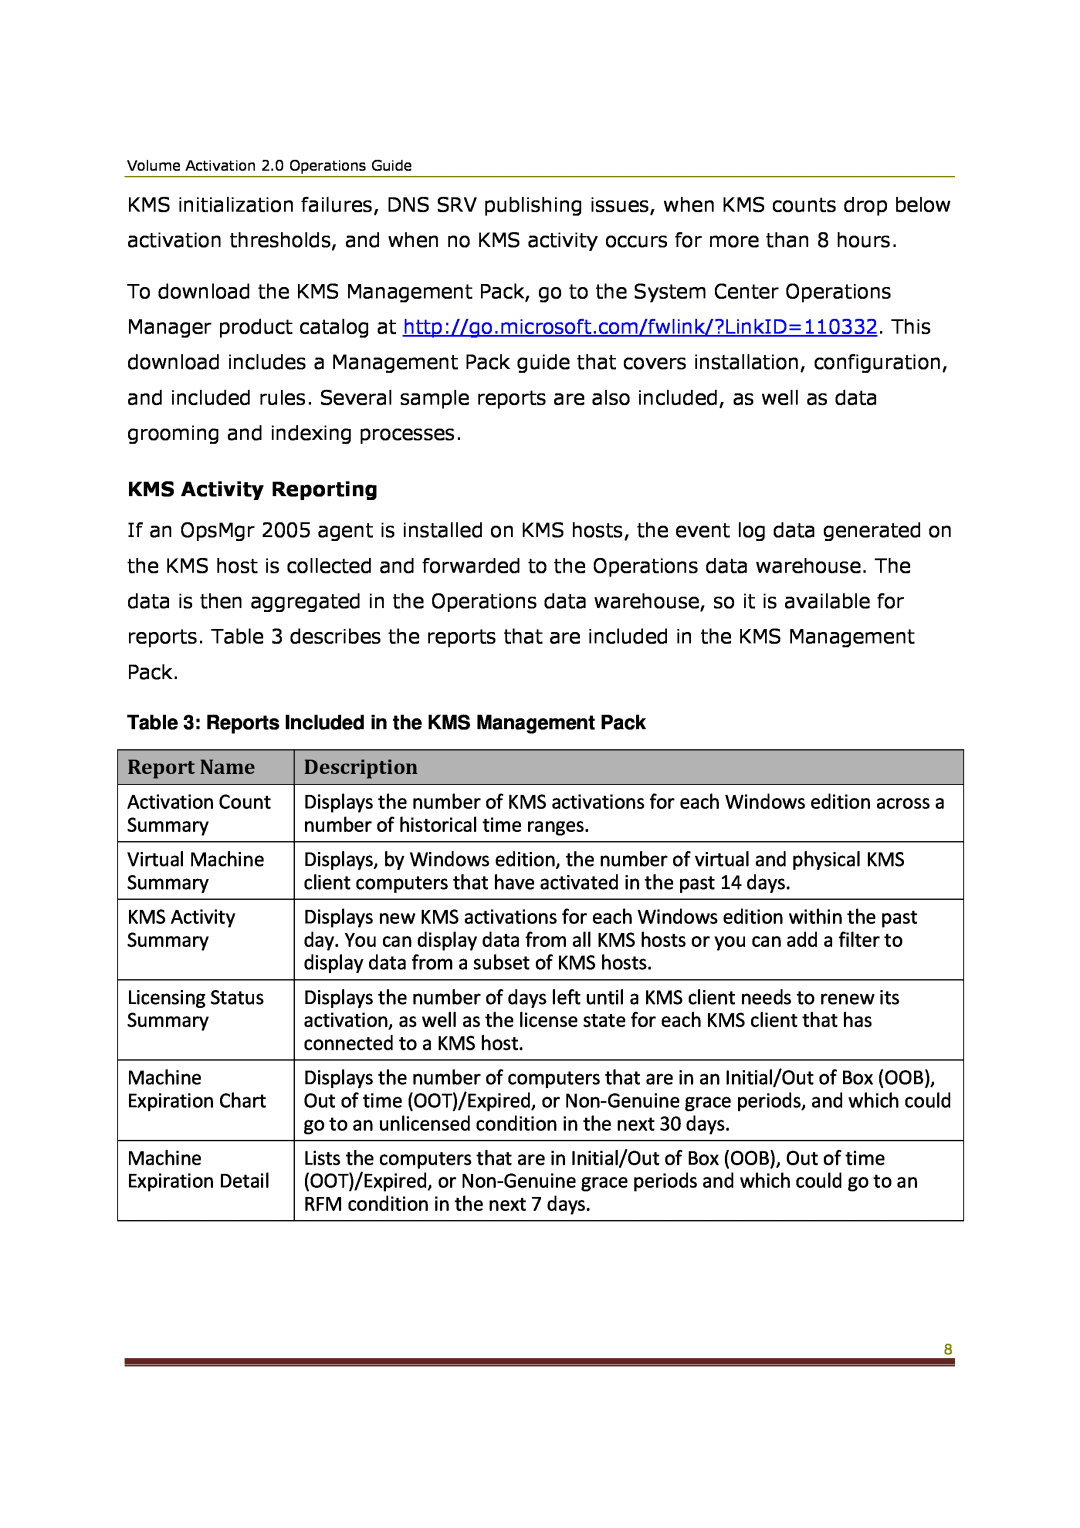 Microsoft 2 manual Report Name, Description, Reports Included in the KMS Management Pack 